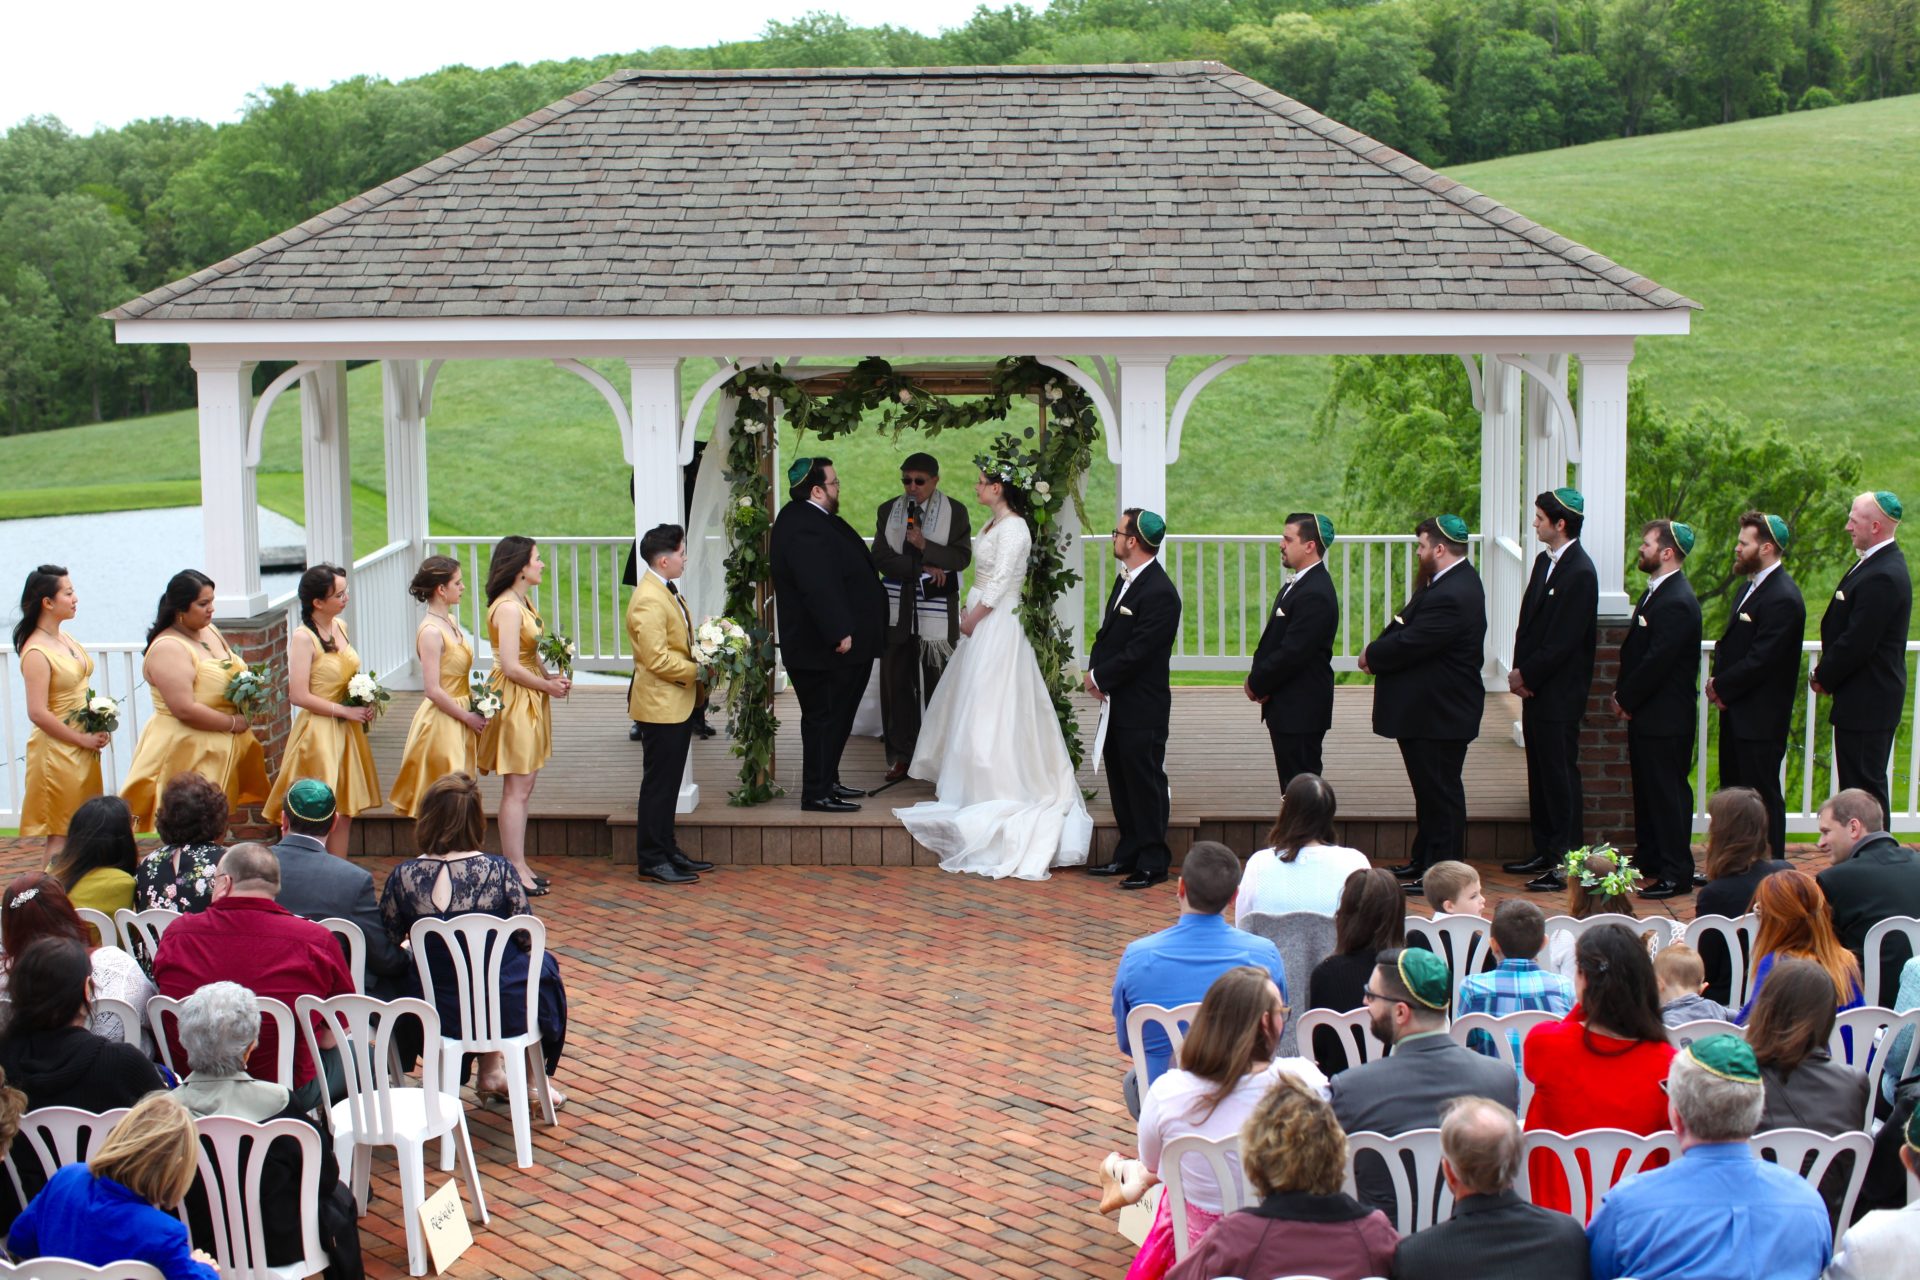 Lord of the Rings themed wedding at outdoor wedding venue in Frederick MD Morningside Inn